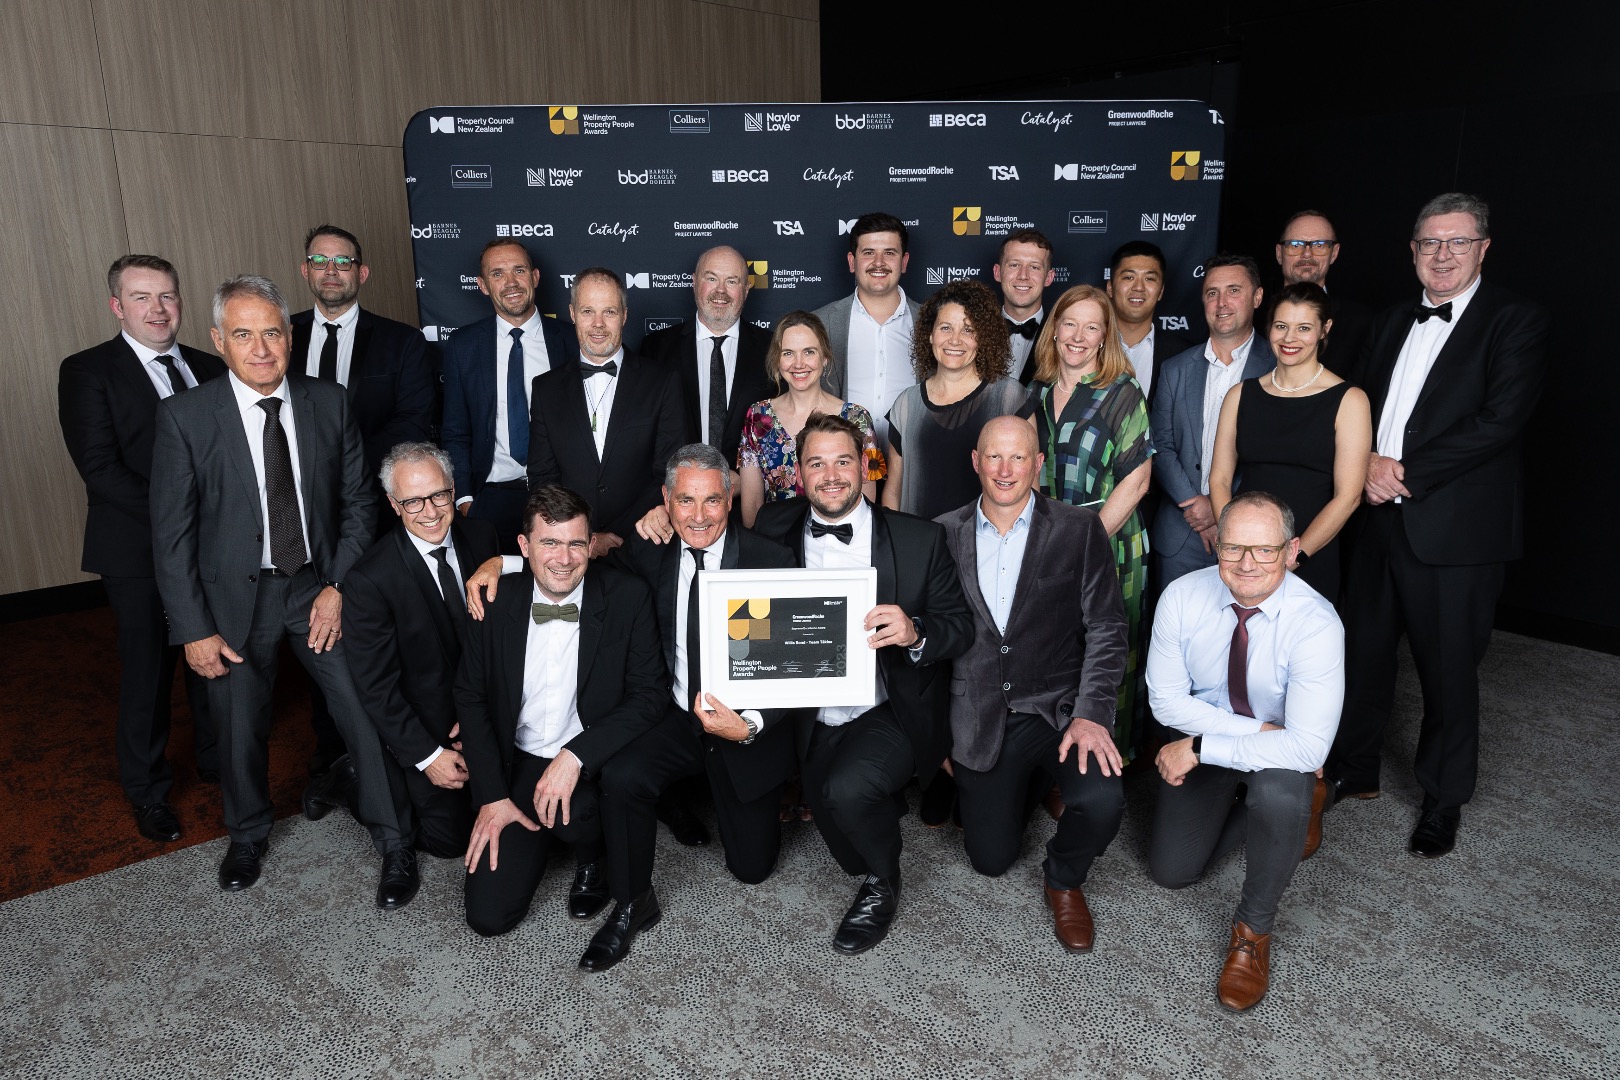 The project team behind the design, construction and delivery of Tākina – Wellington Convention and Exhibition Centre were announced winners of both the Barnes Beagley Doherr Best Team Award and the Greenwood Roche Supreme Excellence Award at this year's Wellington Property People Awards.